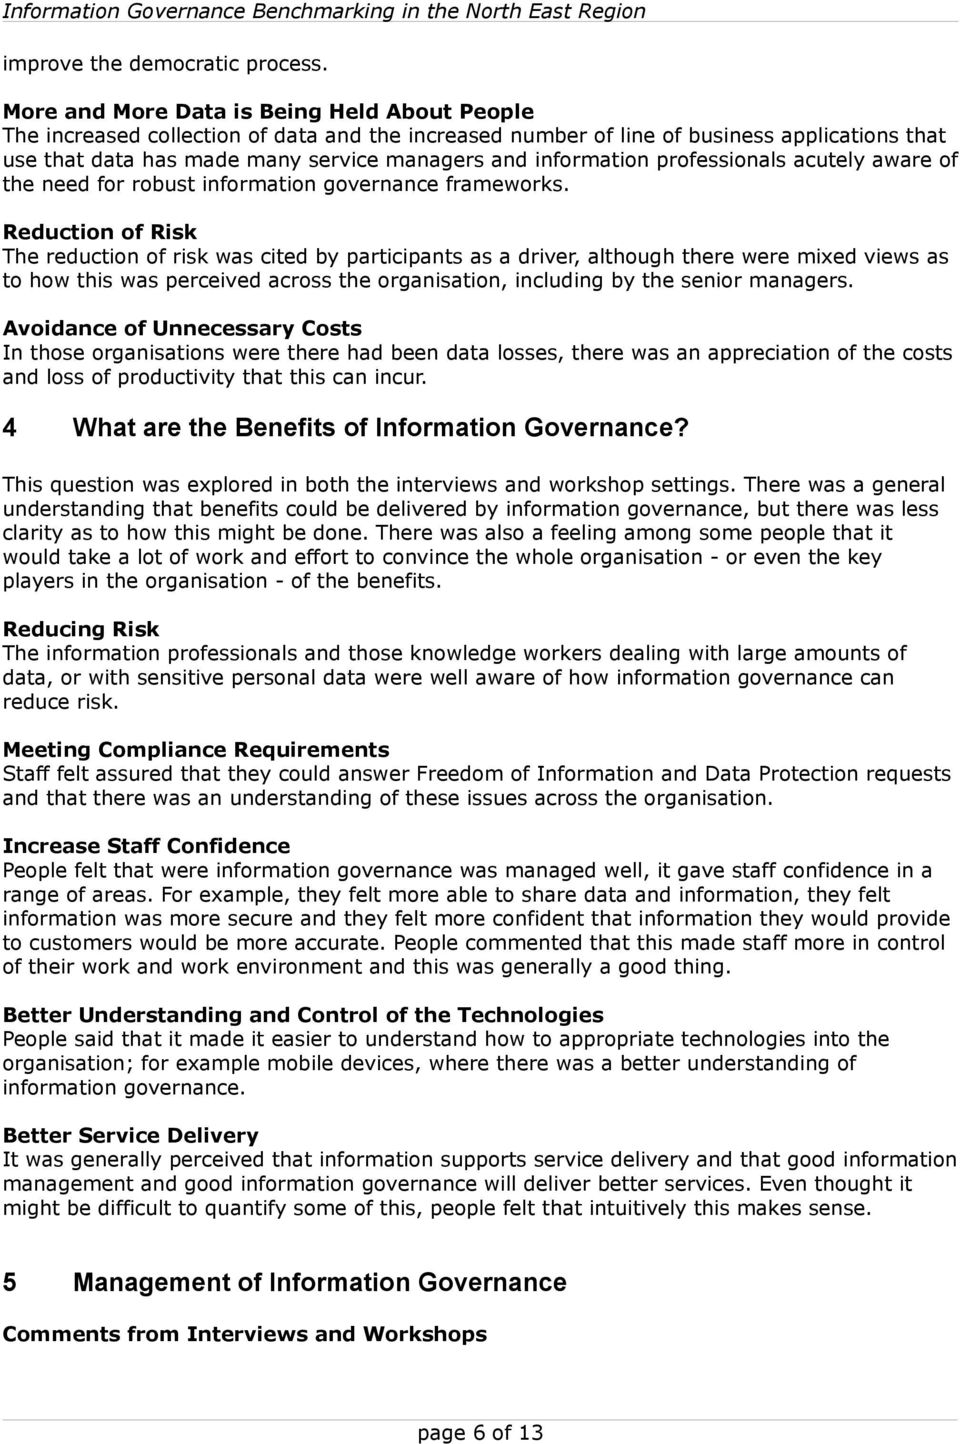 information professionals acutely aware of the need for robust information governance frameworks.